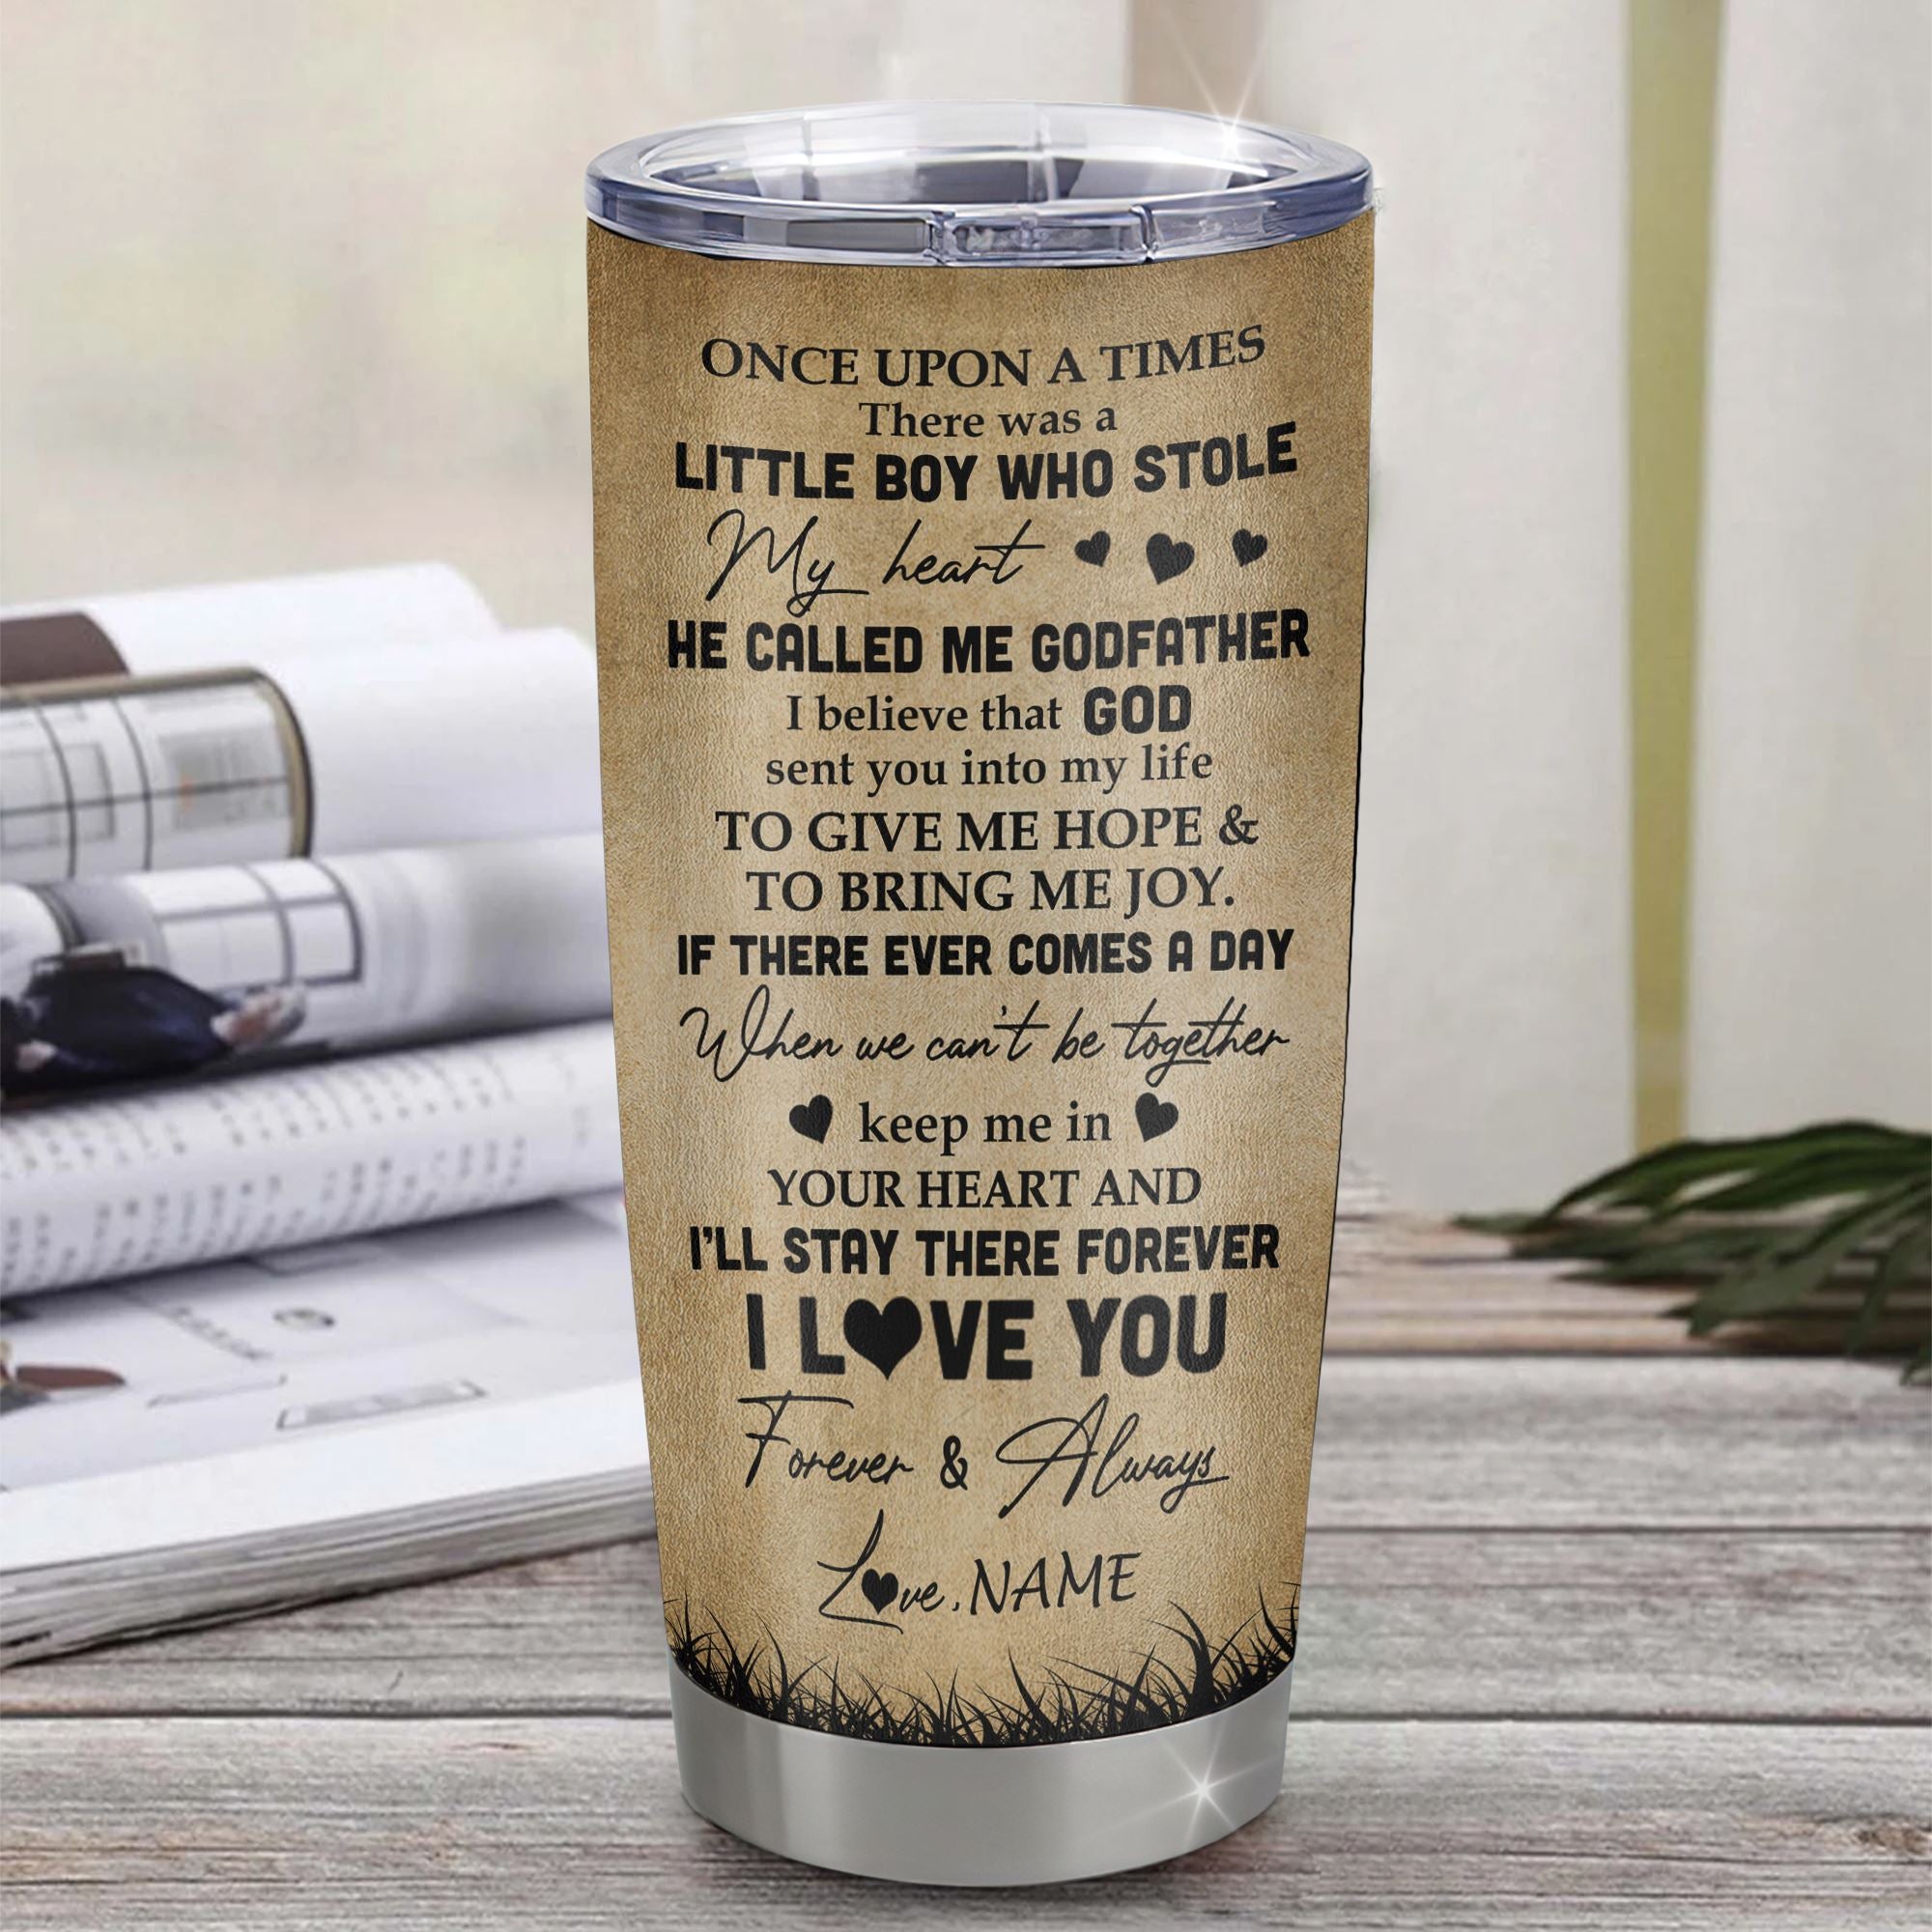 Personalized_To_My_Godson_Lion_Tumbler_From_Godfather_Stainless_Steel_Cup_I_ll_Stay_There_Forever_Godson_Birthday_Graduation_Christmas_Travel_Mug_Tumbler_mockup_1.jpg